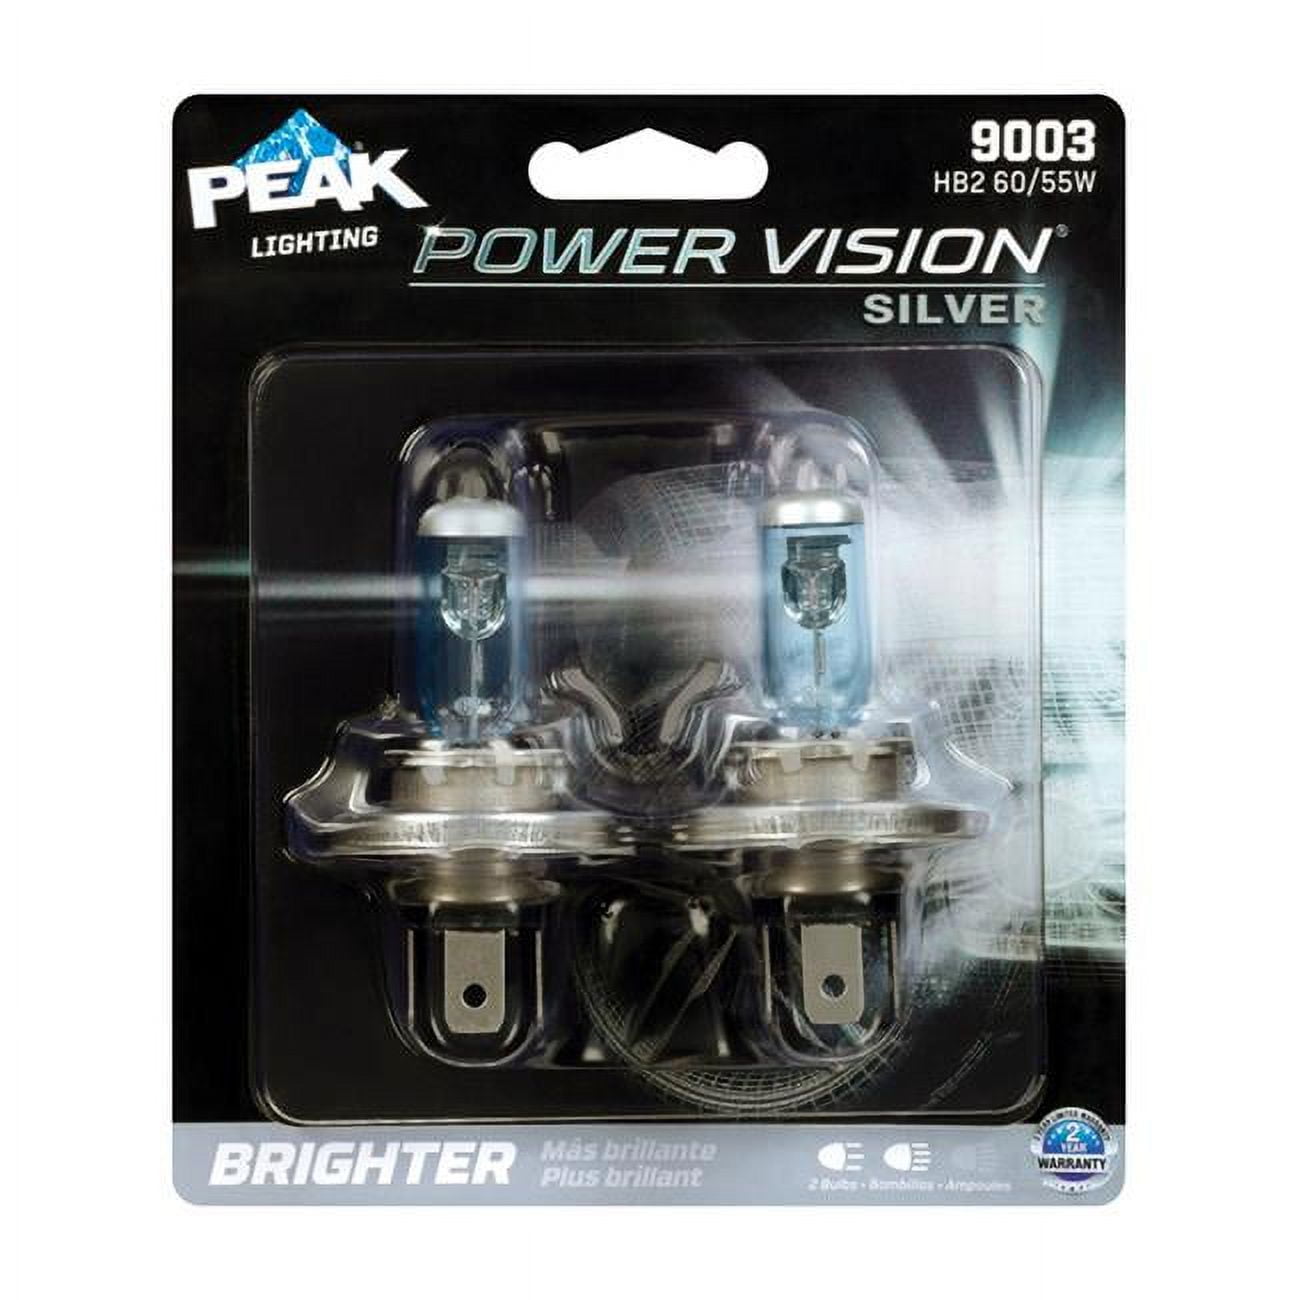 8020170 Power Vision Silver 12.8 V Halogen T5 Automotive Bulb - 9003 Hb2 60 & 55w - Pack Of 2